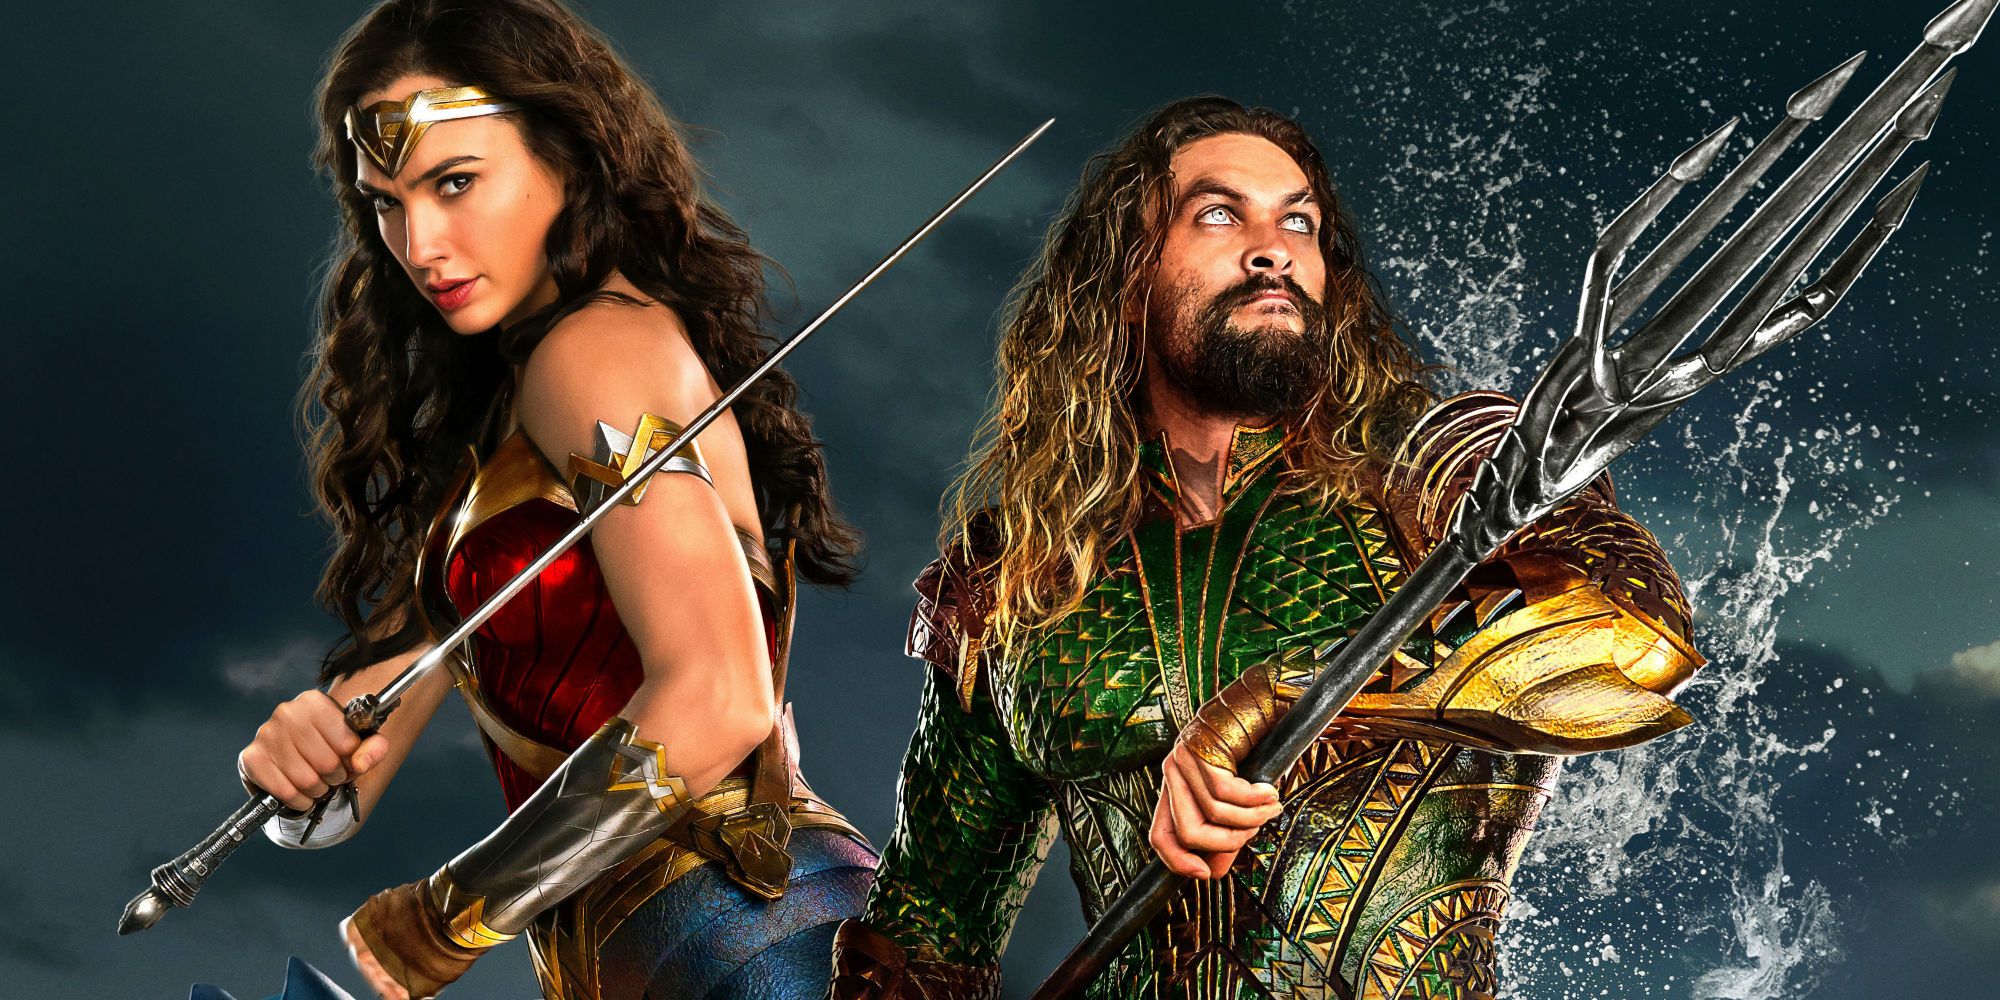 Wonder Woman and Aquaman from the DCU